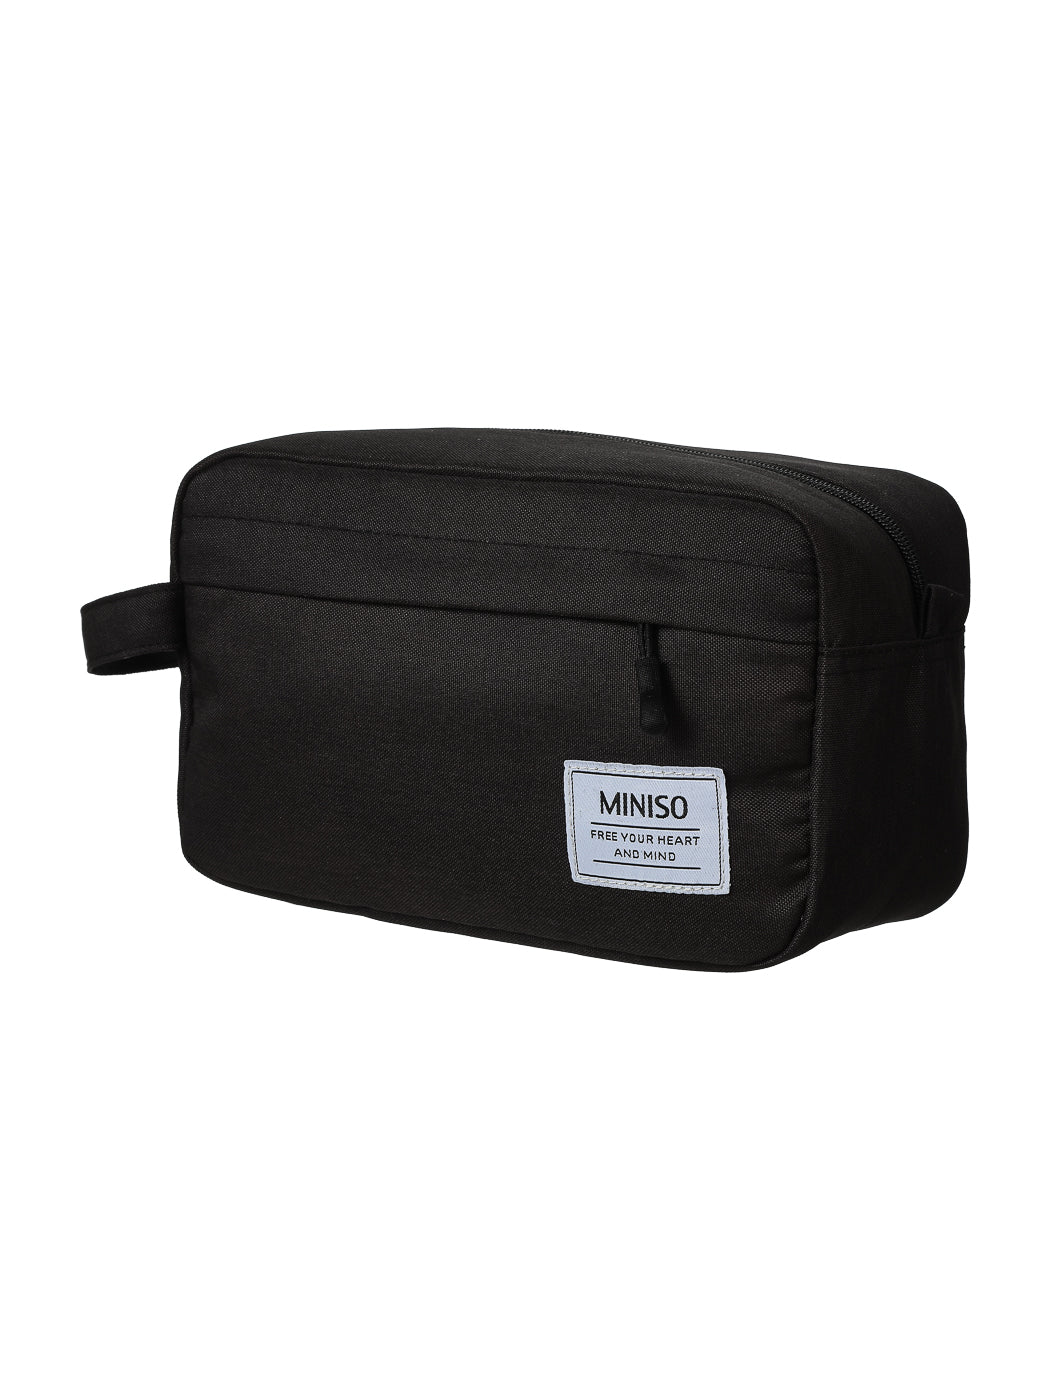 MINISO YOUTH OF THE TIME STORAGE BAG(BLACK) 2010861011105 TRAVEL STORAGE BAG